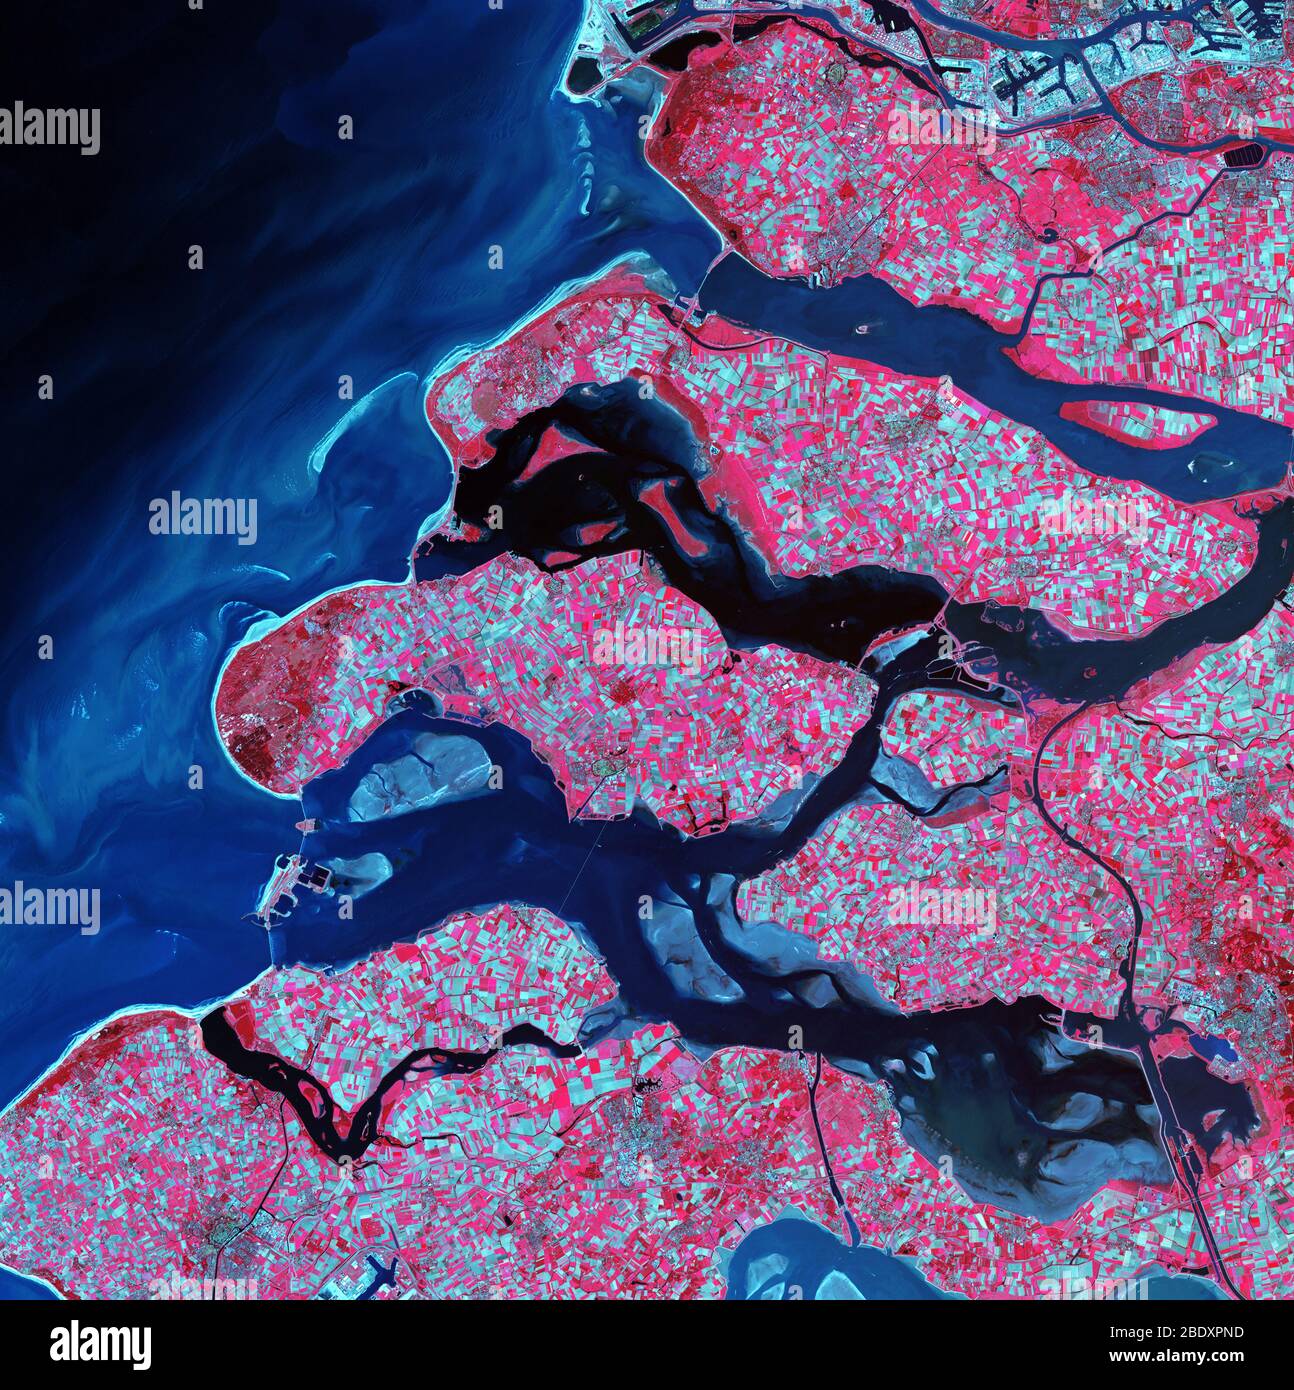 Rhine-Meuse delta, satellite image. North is at top. Vegetation is red, barren areas are light blue, and water is dark blue. This delta has been formed by sediments from the Meuse and Rhine rivers as they flow into the North Sea on the coast of the Netherlands. Most of the land here is covered with fields, with barren fields in blue and growing crops in red. Barriers are seen across the exits of the delta, holding back the tides and protecting this low-lying area. The bright light blue area at upper right is part of the port of Rotterdam. The area shown in this image is around 60 kilometers wi Stock Photo